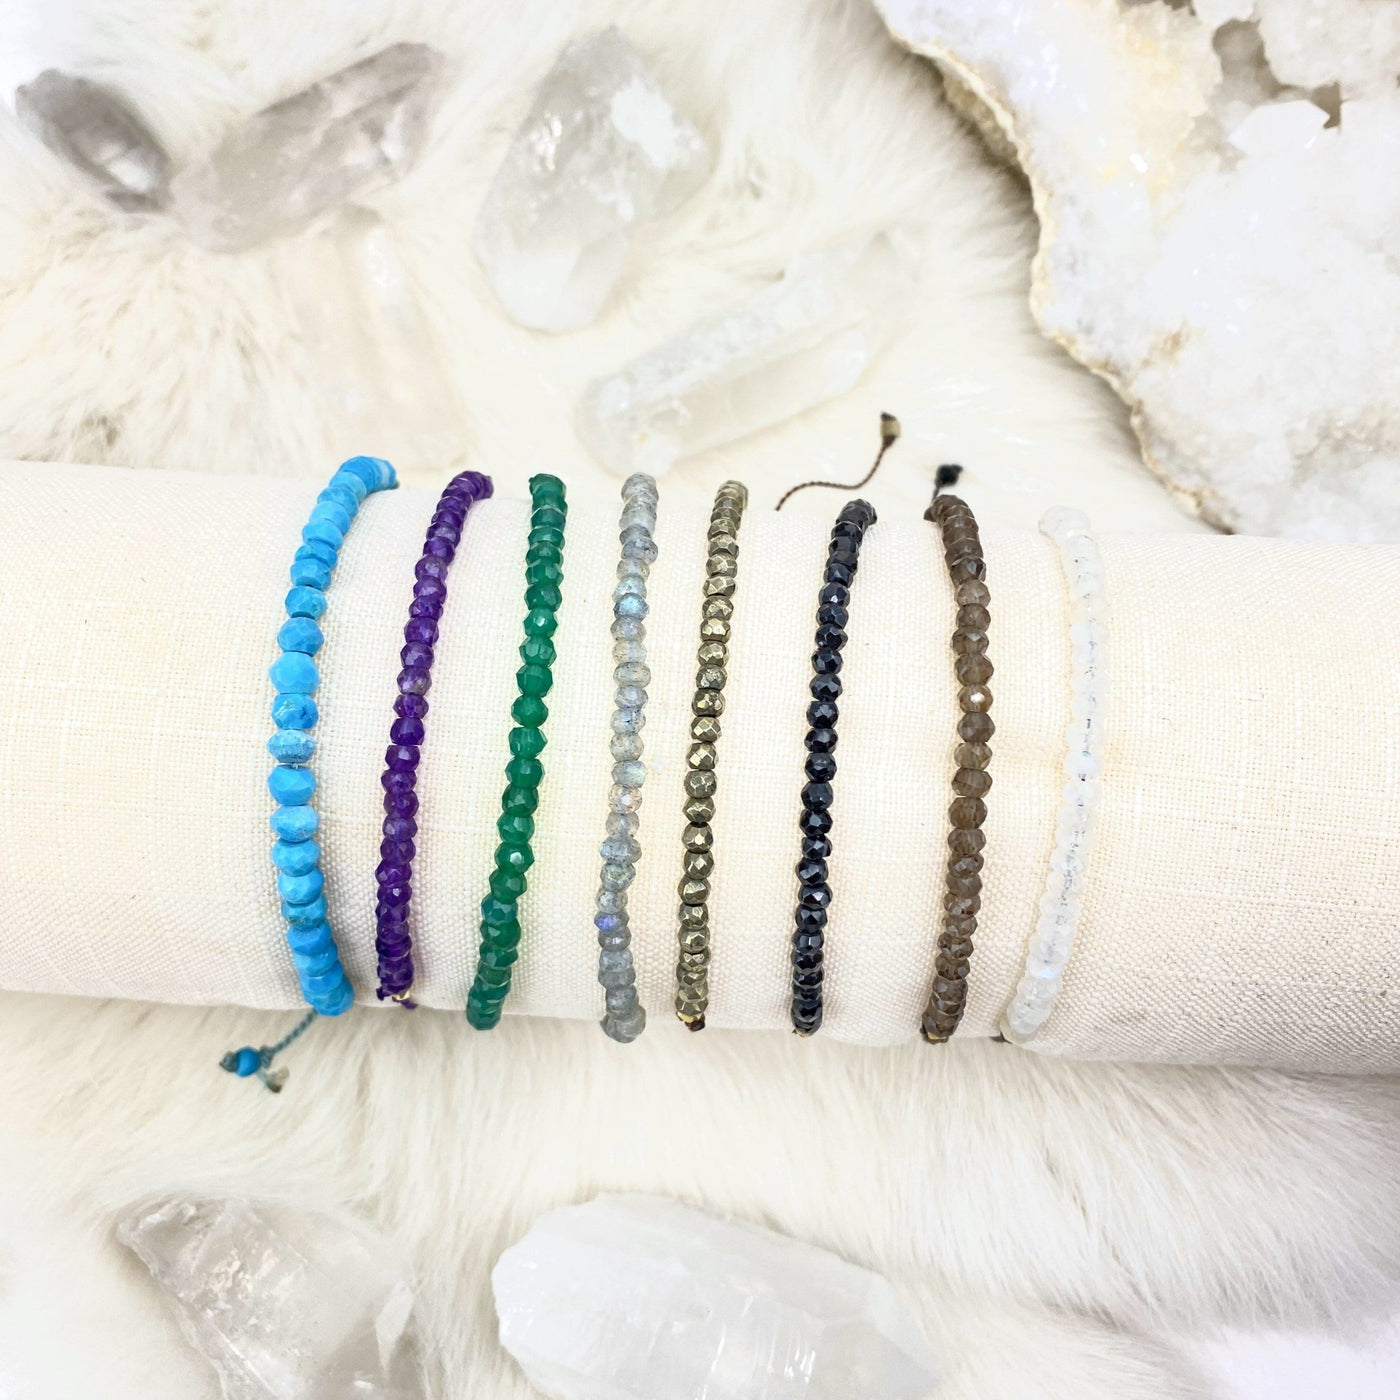 Gemstone Bracelets in all the available stones